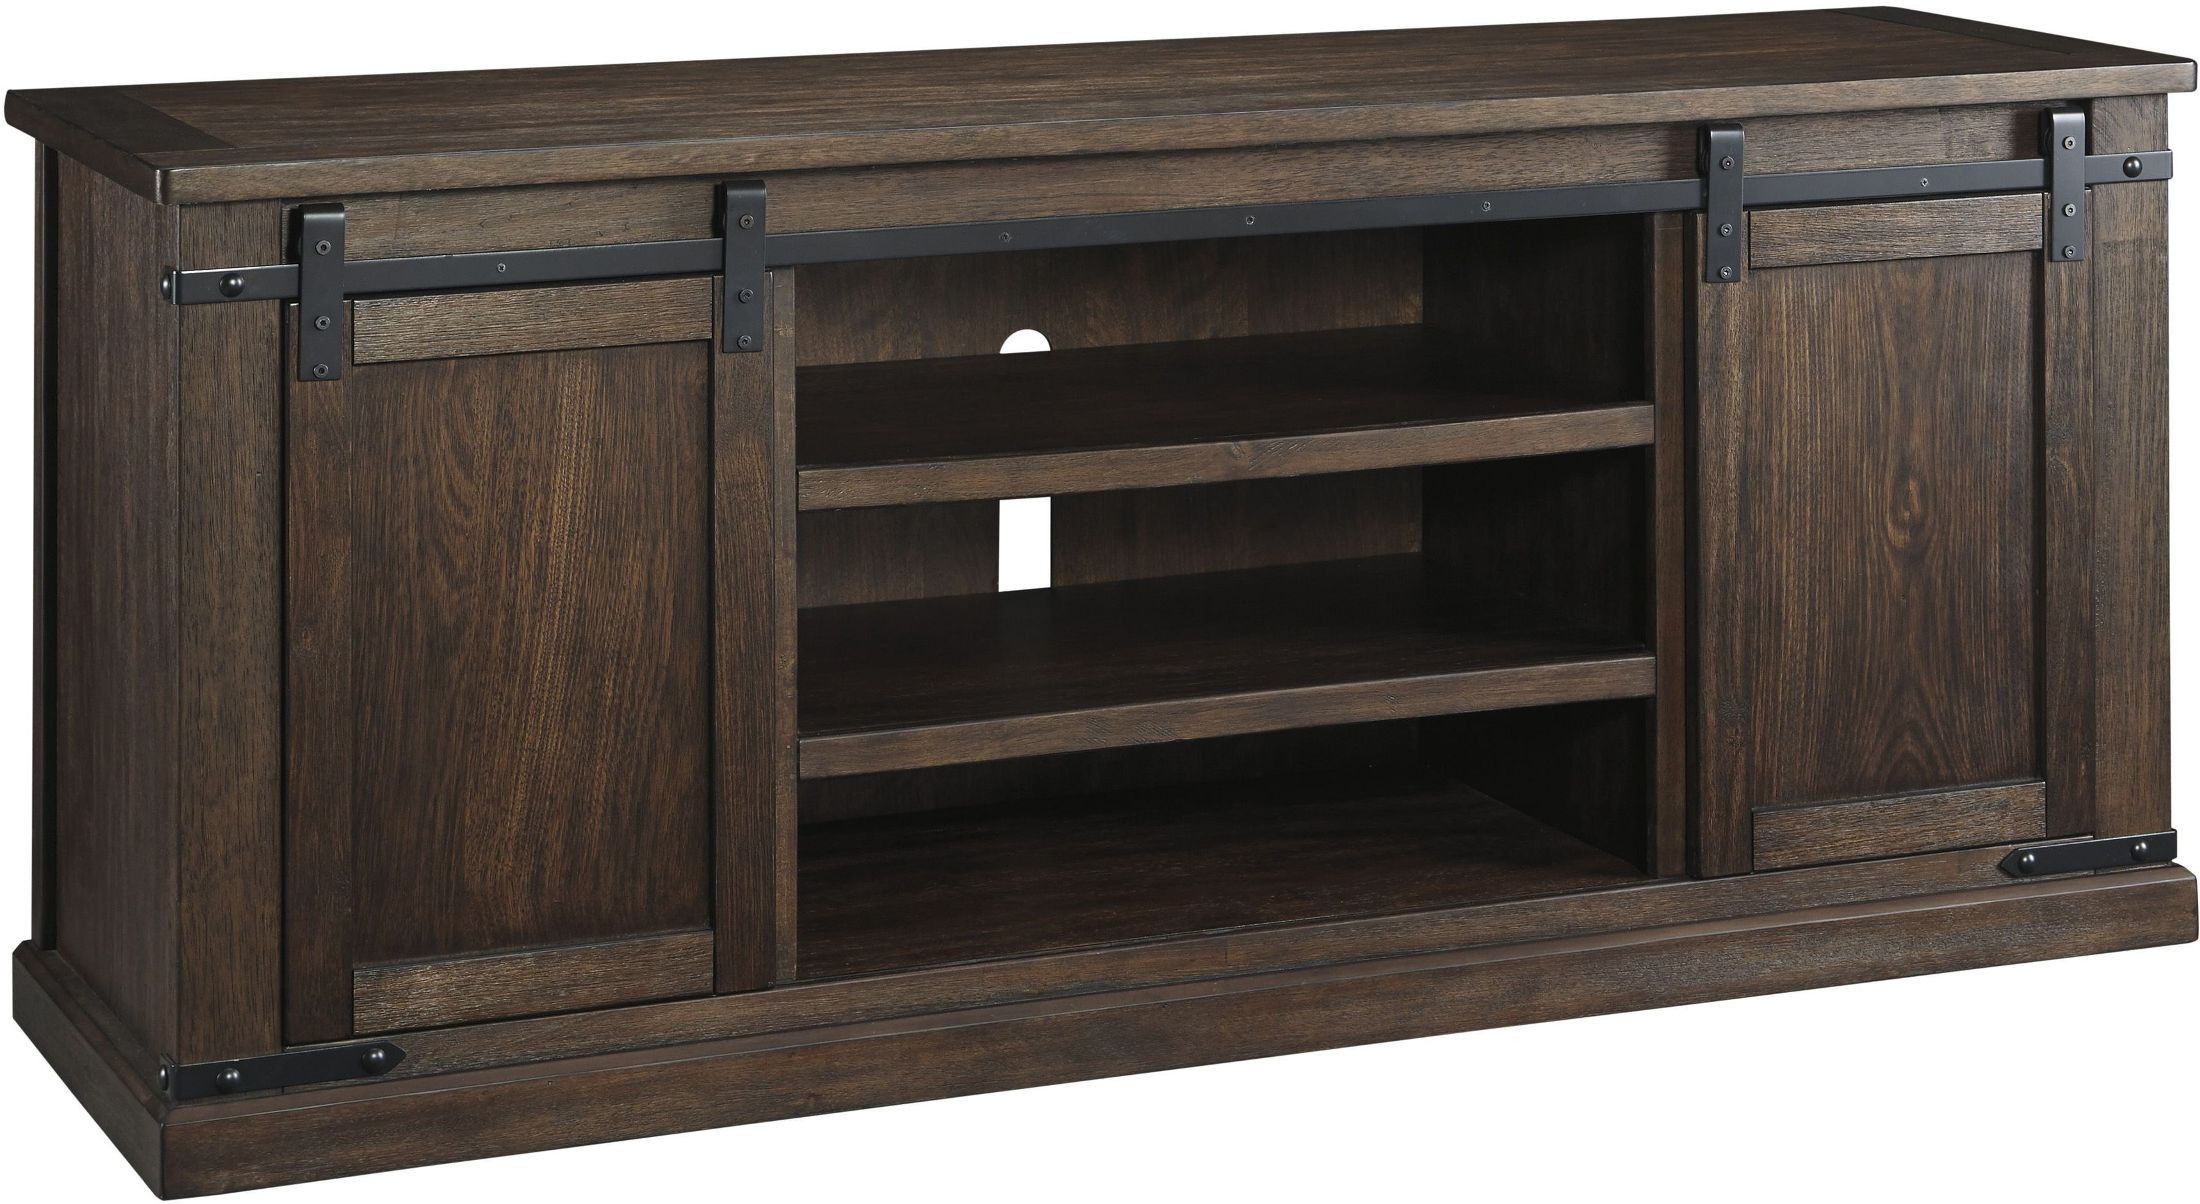 Budmore Rustic Brown Extra Large Tv Stand From Ashley Intended For Rustic Looking Tv Stands (View 2 of 15)